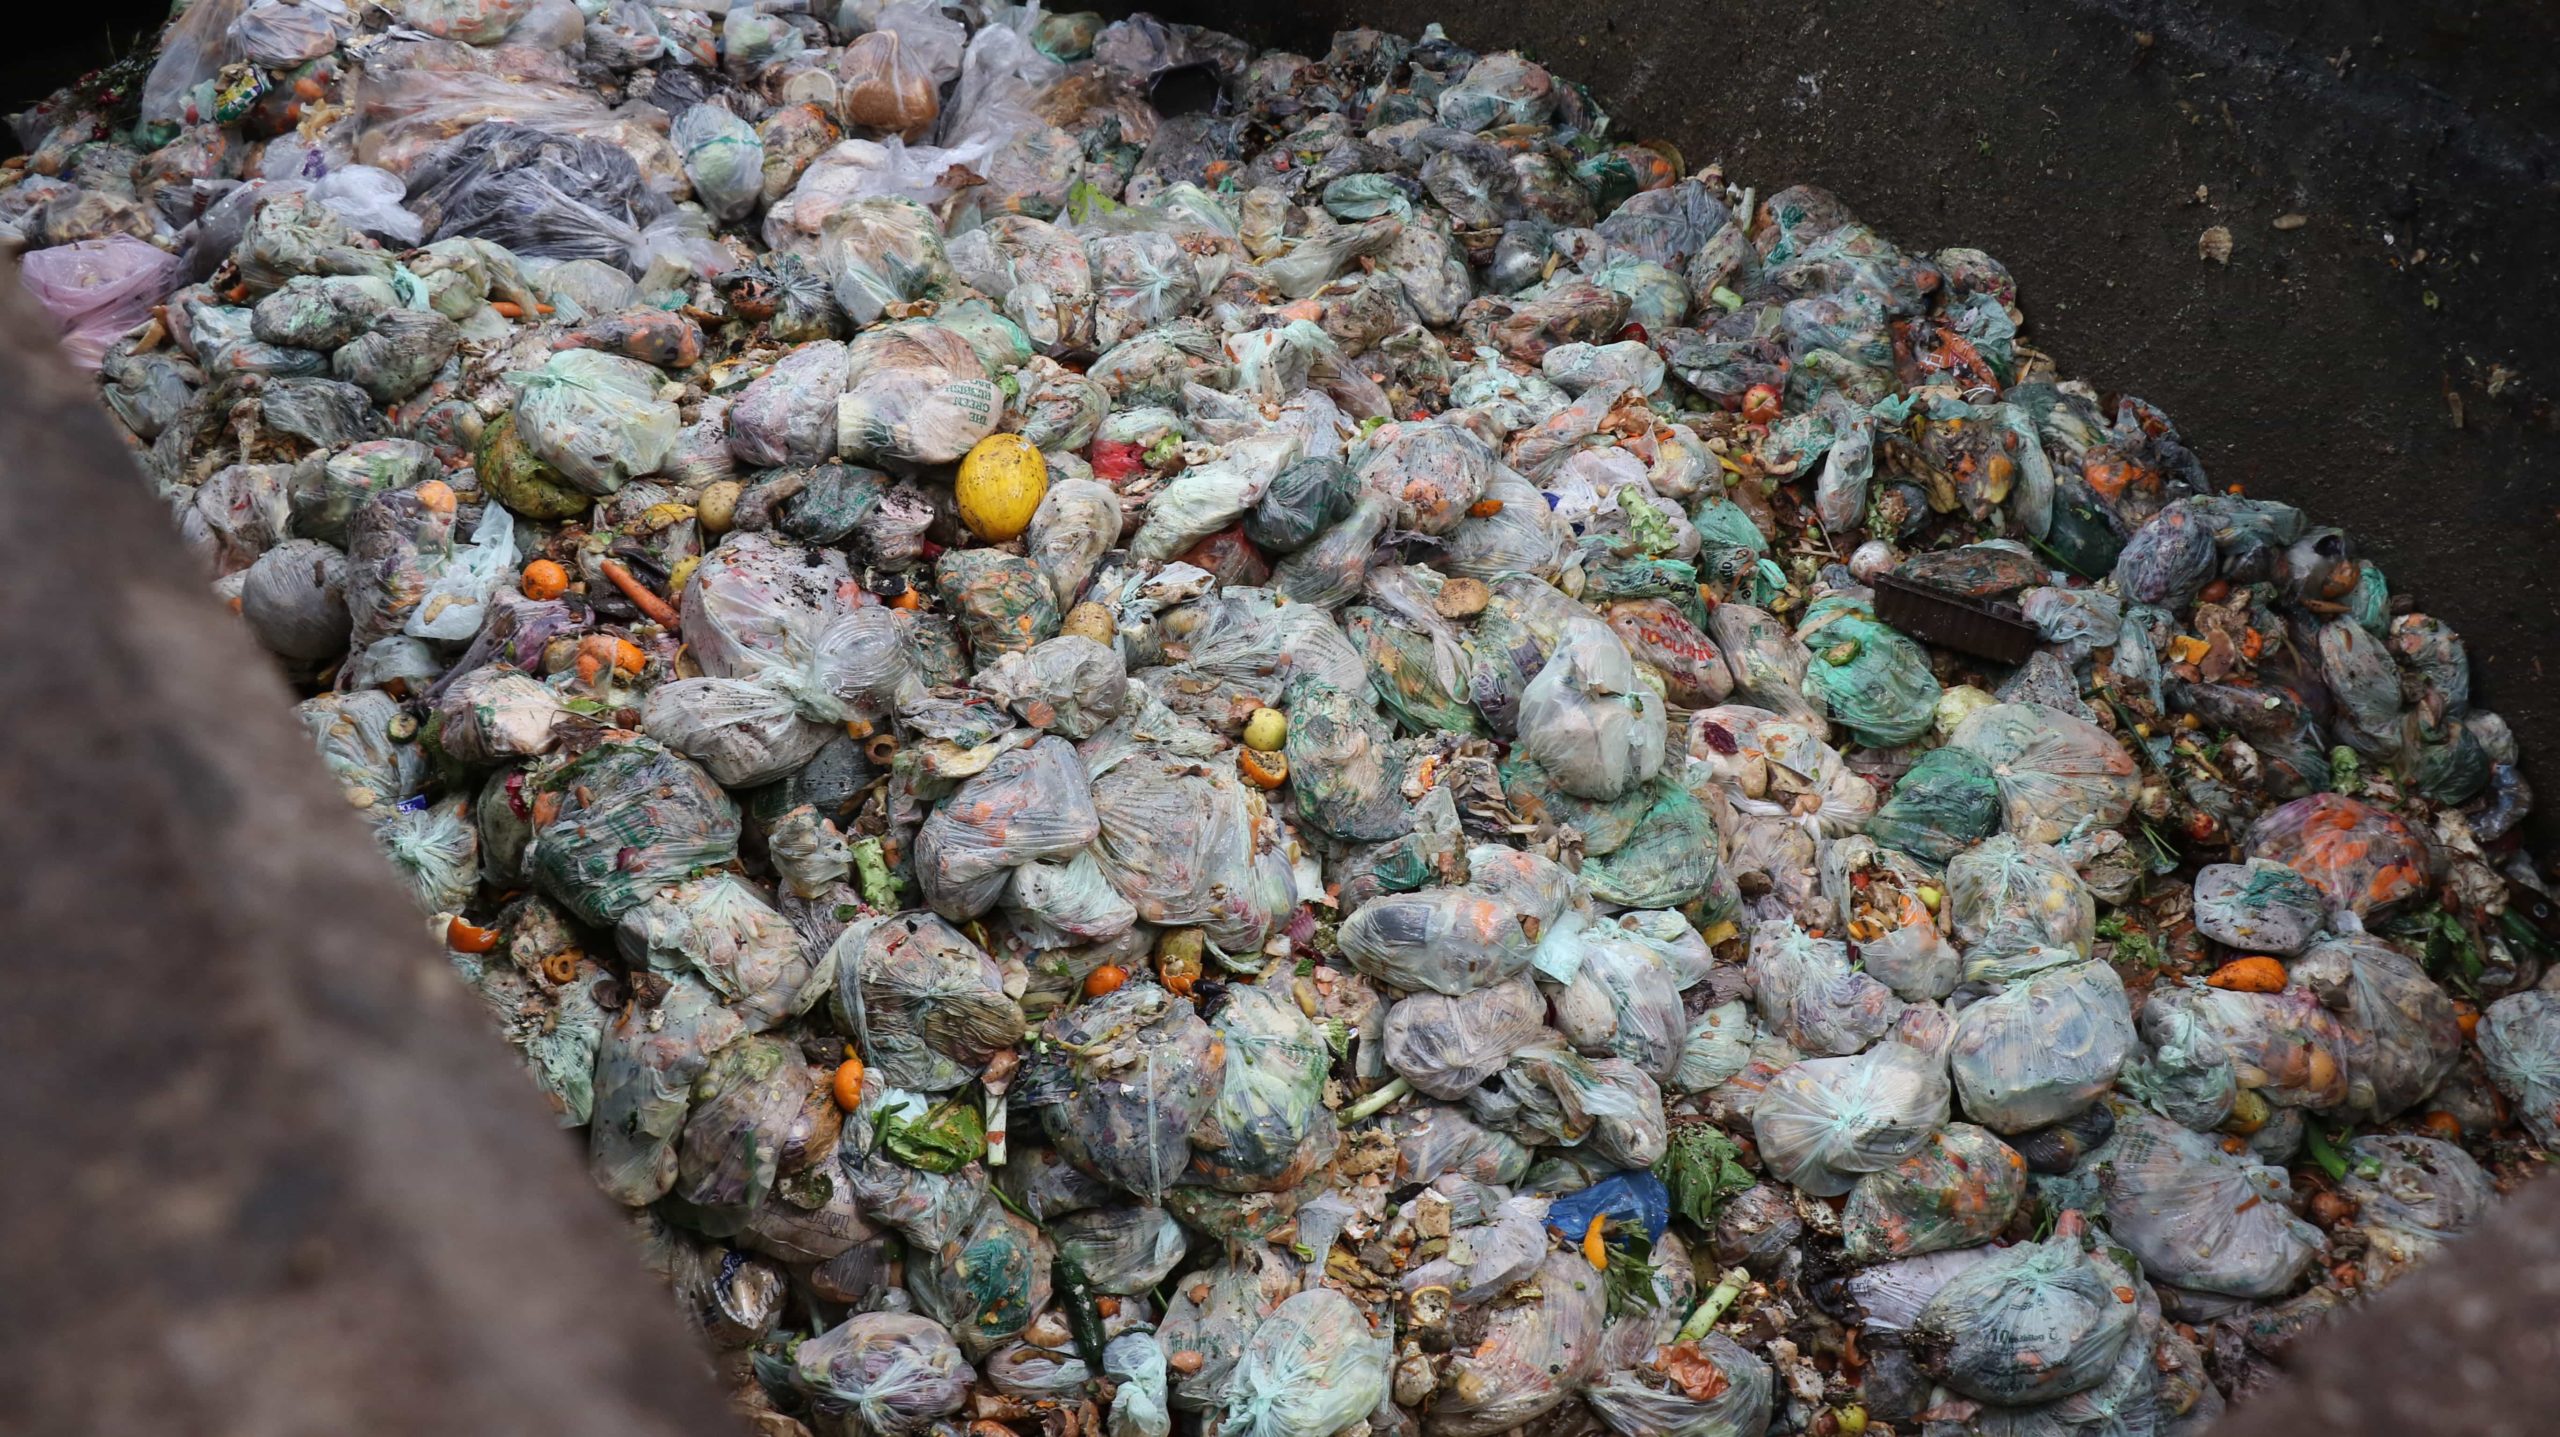 Most households present food waste in compostable bags